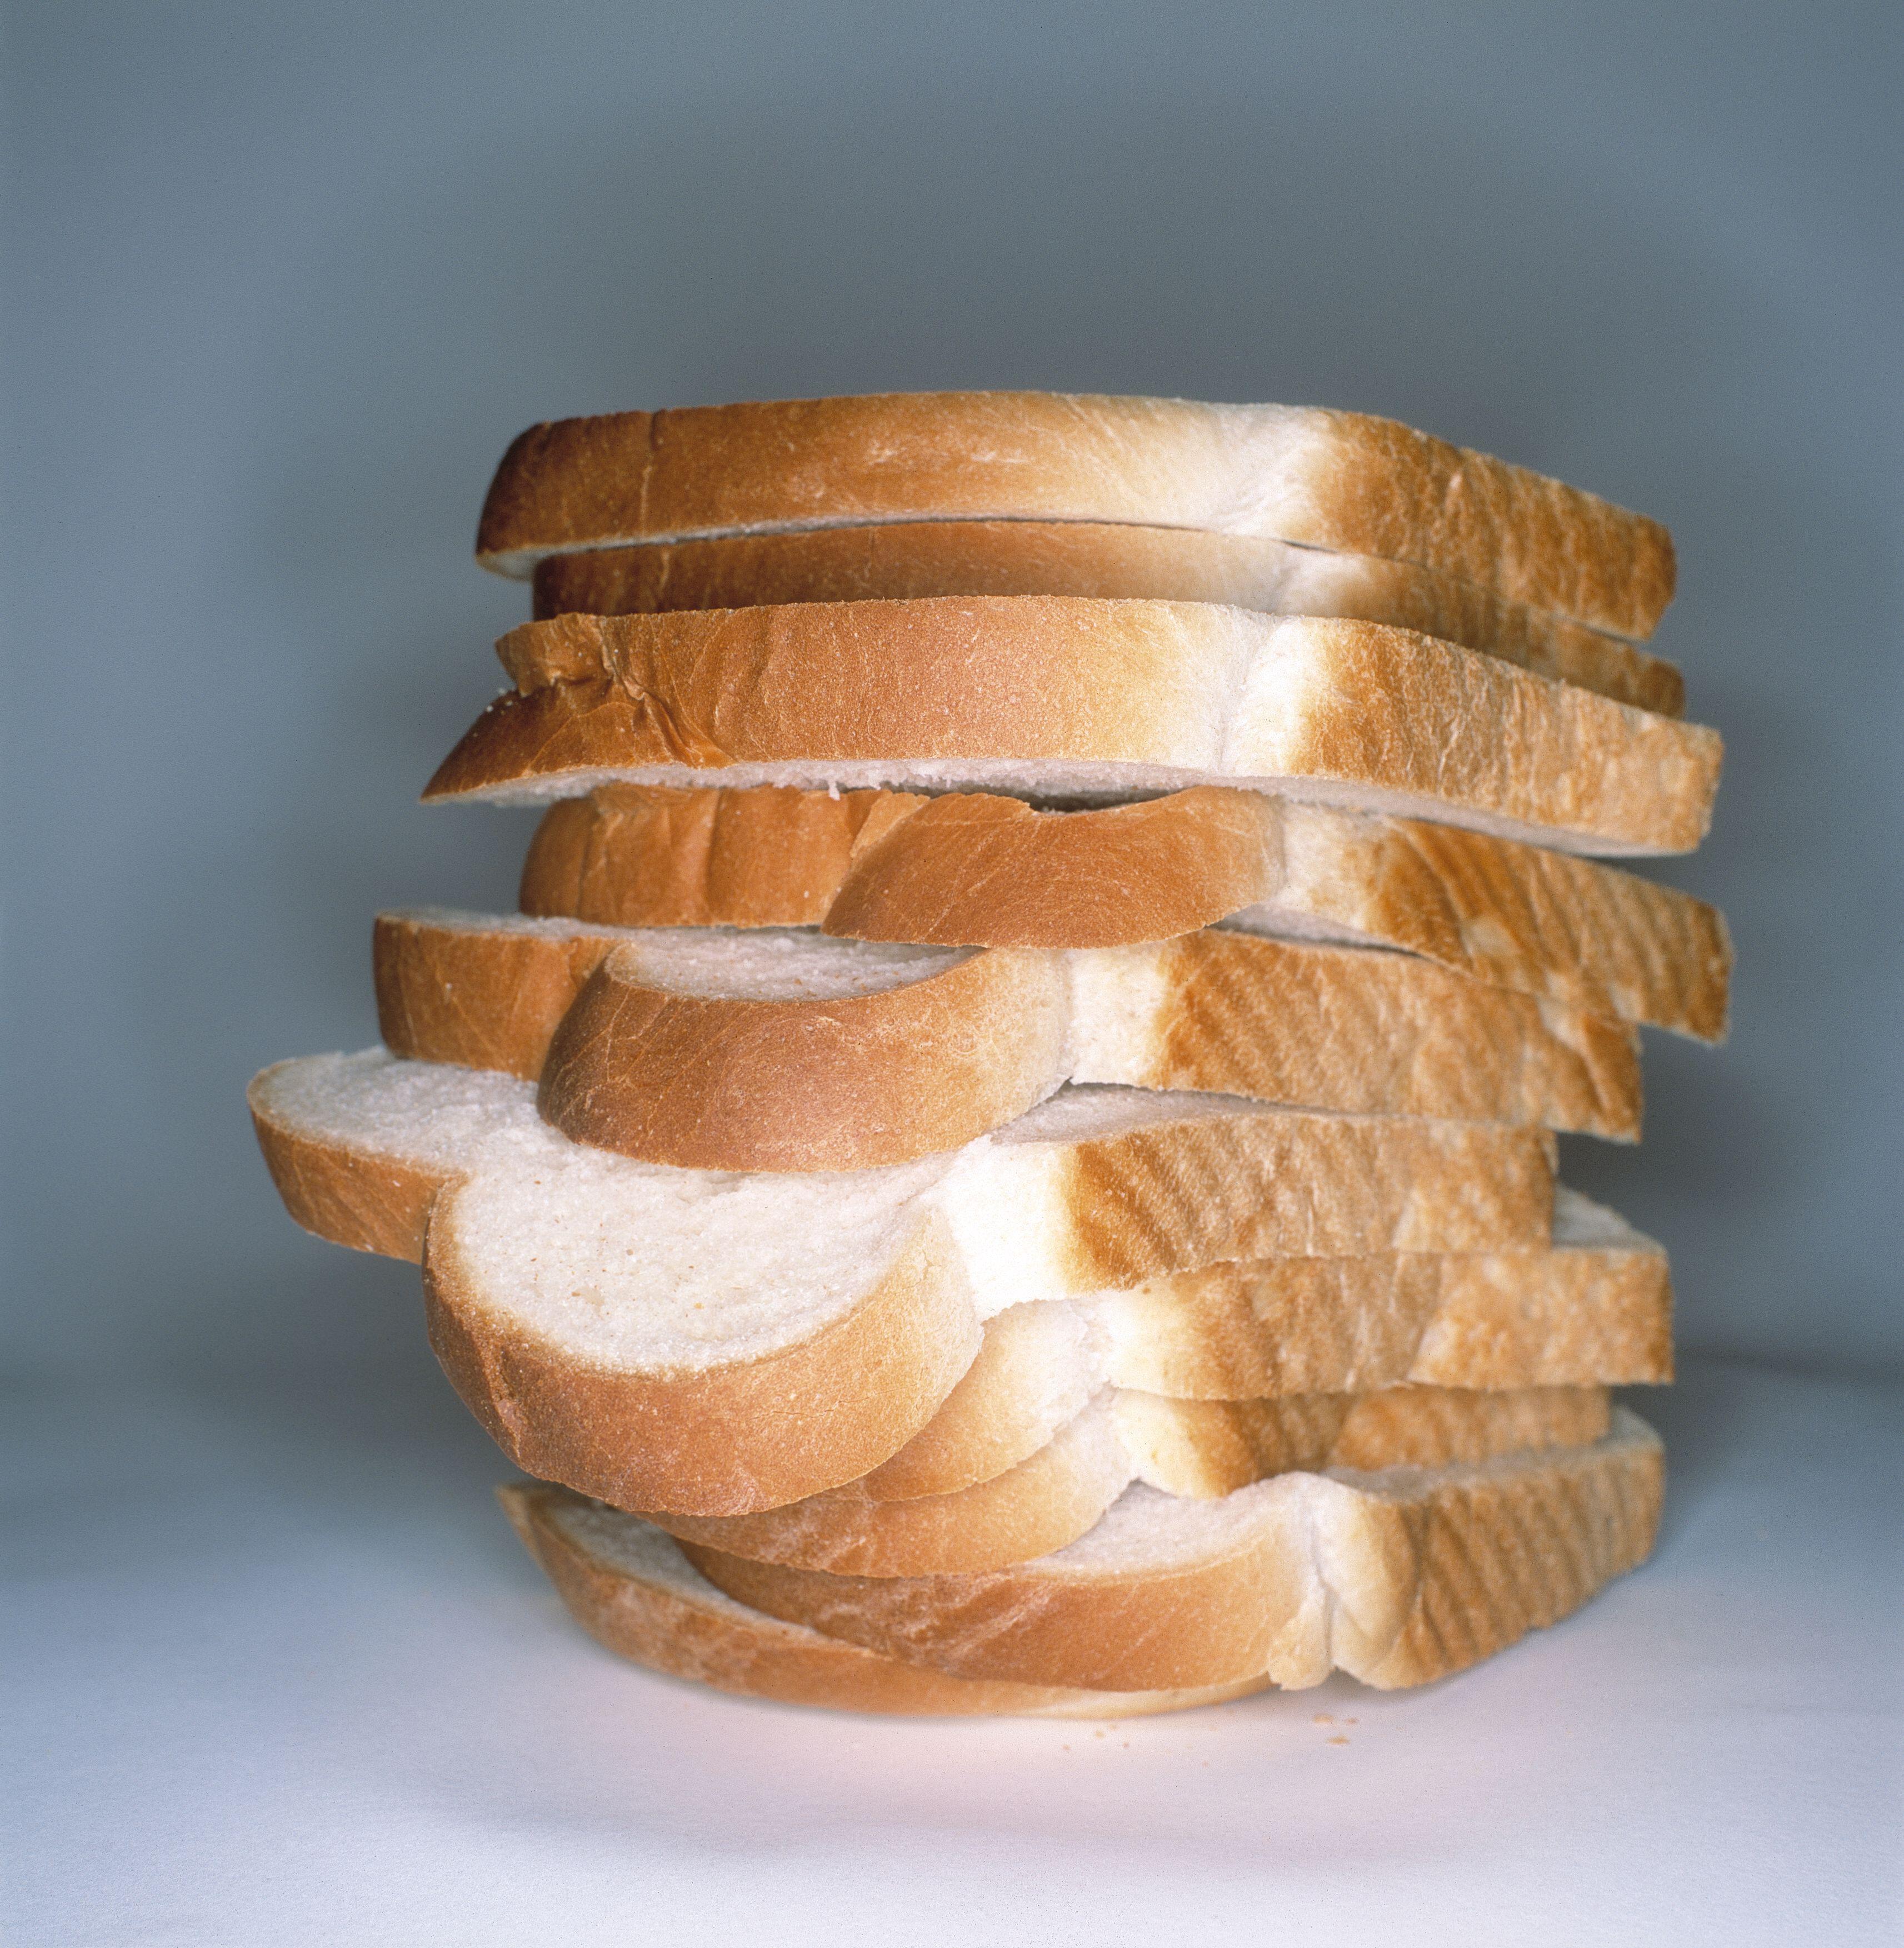 A stack of sliced white bread